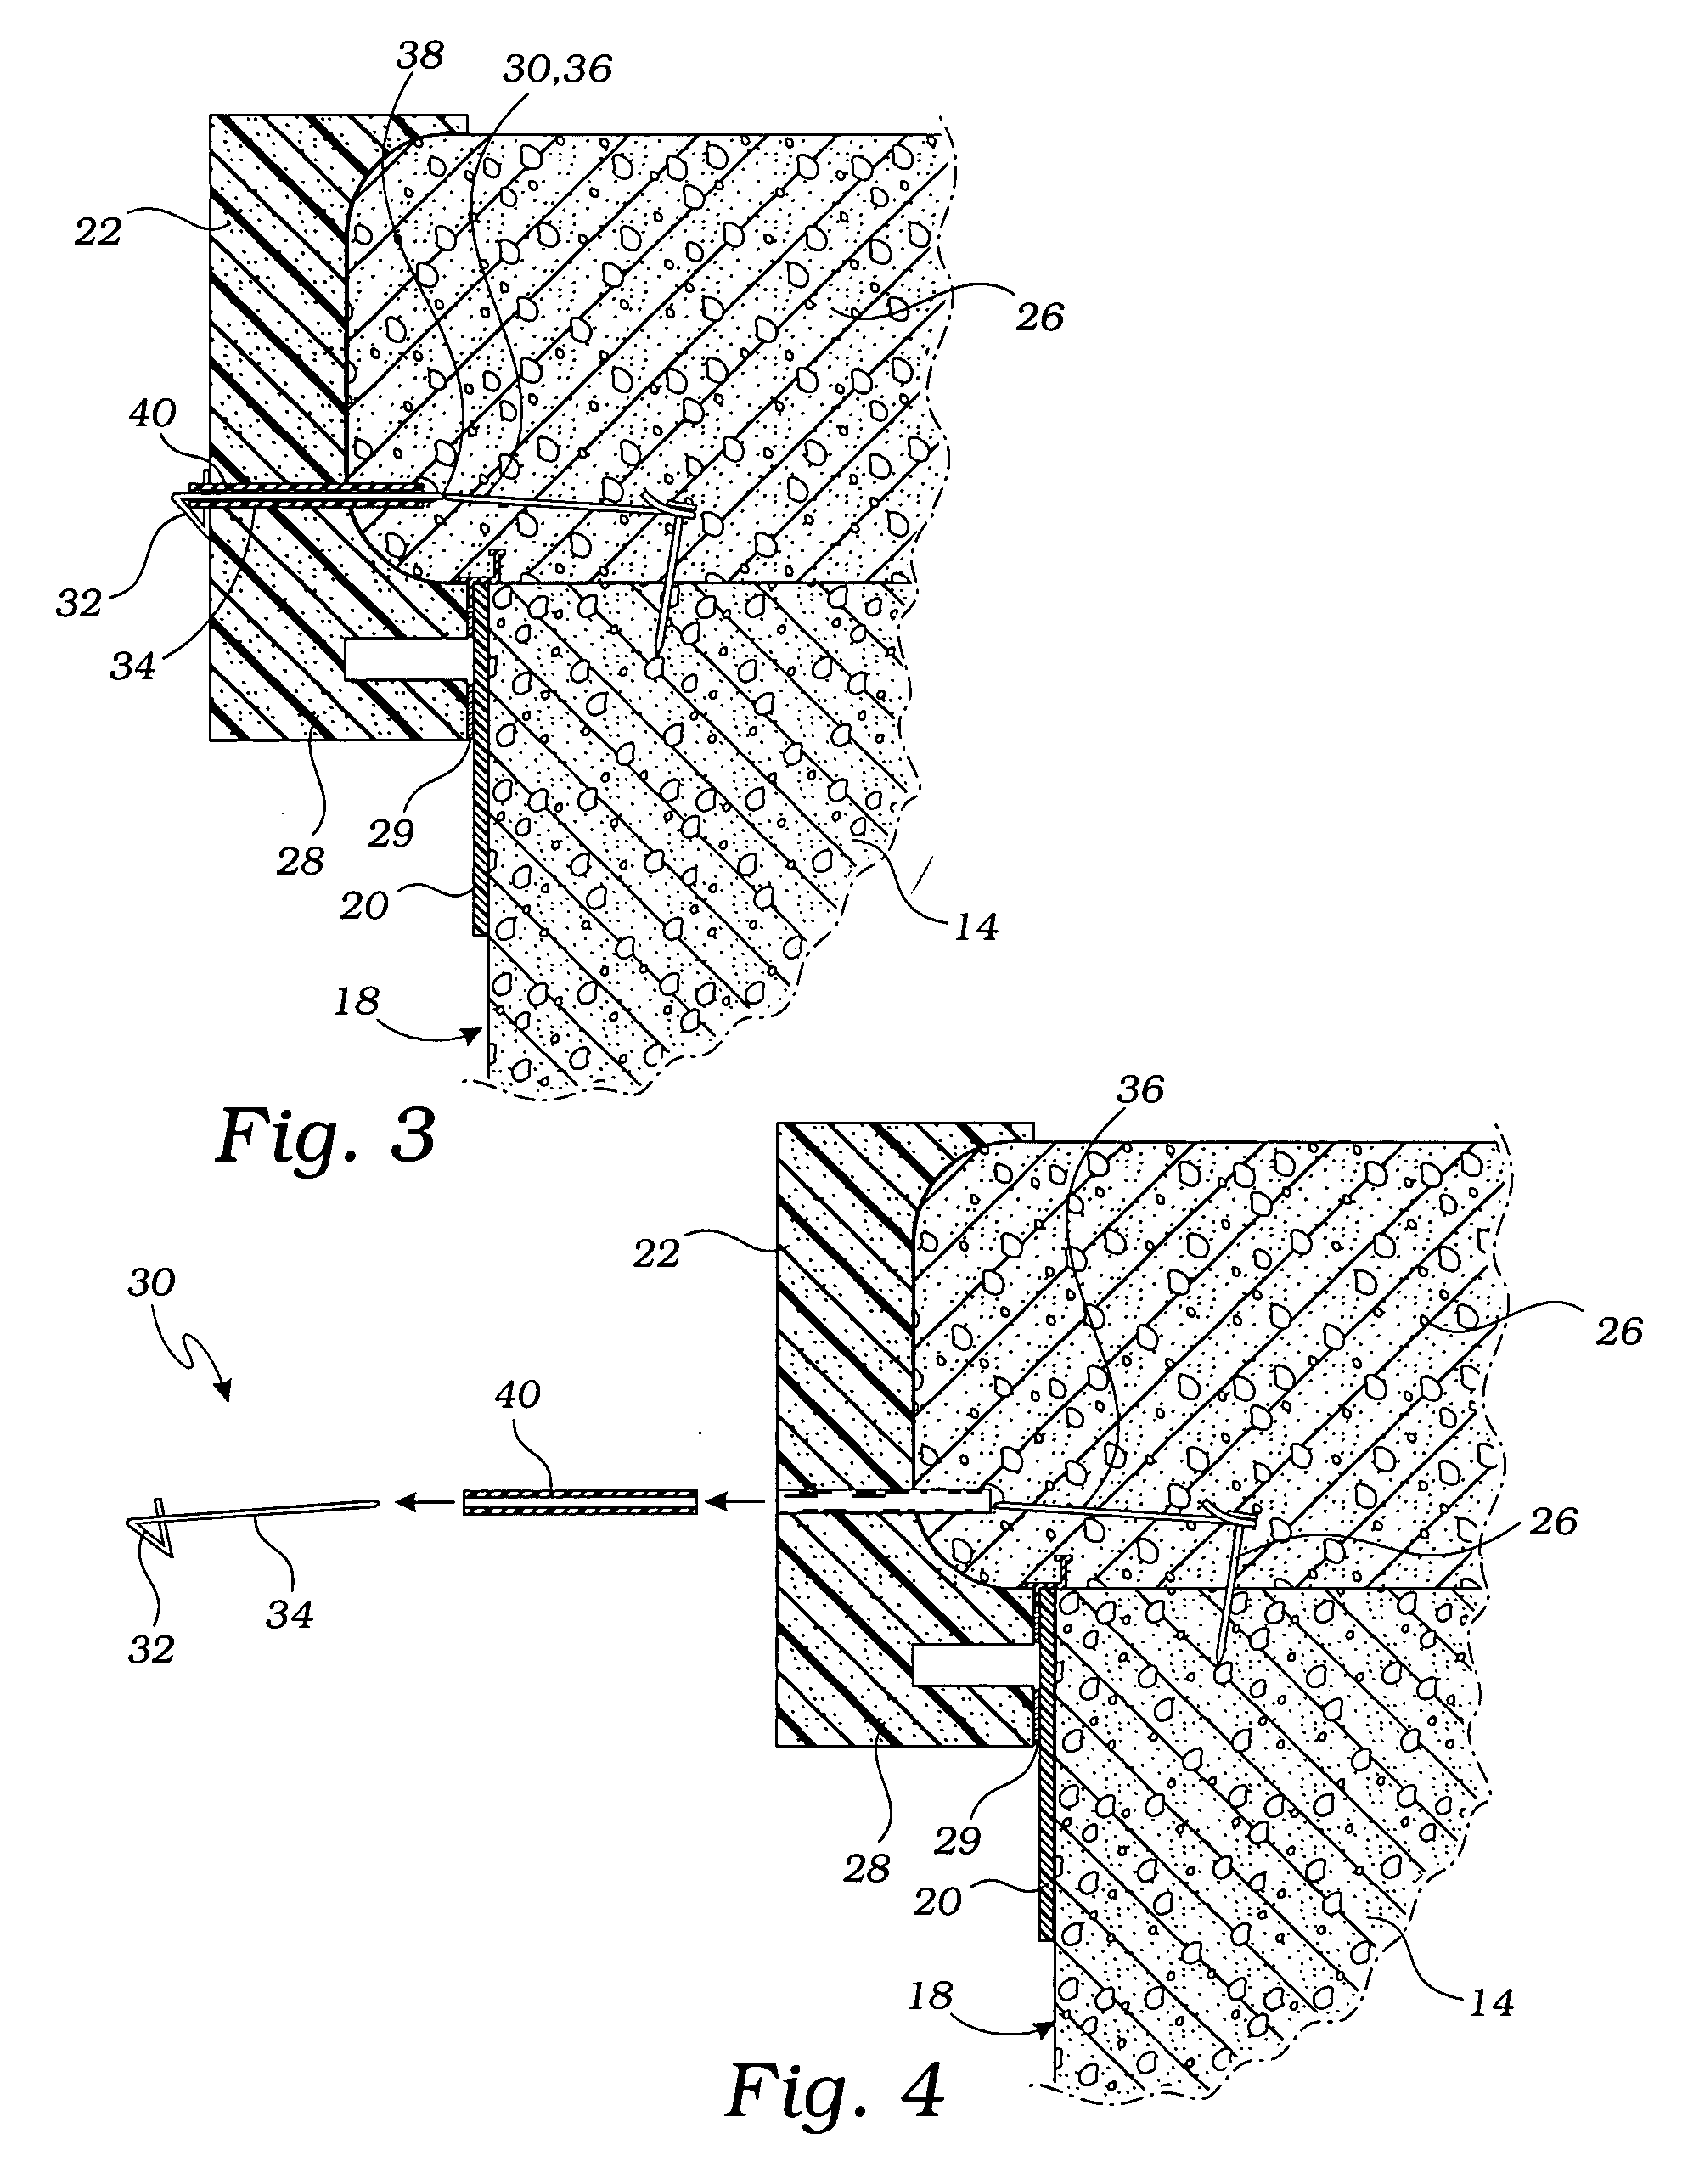 Form support for supporting a disposable mold form